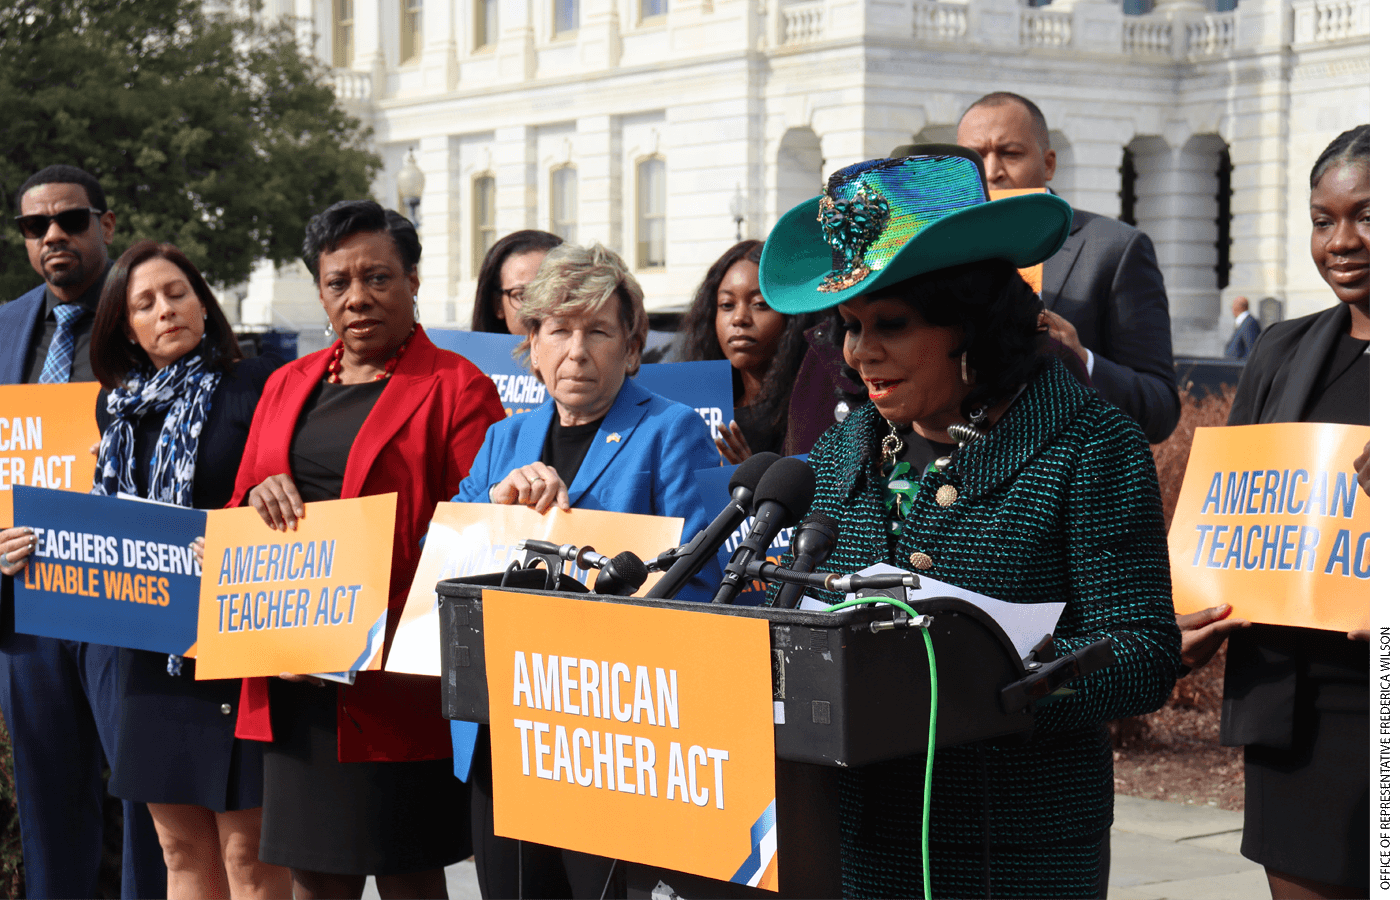 Teachers Union Leaders Becky Pringle and Randi Weingarten look on earlier this month as a member of Congress, Frederica Wilson, speaks about legislation that would raise starting teacher pay to $60,000 a year.